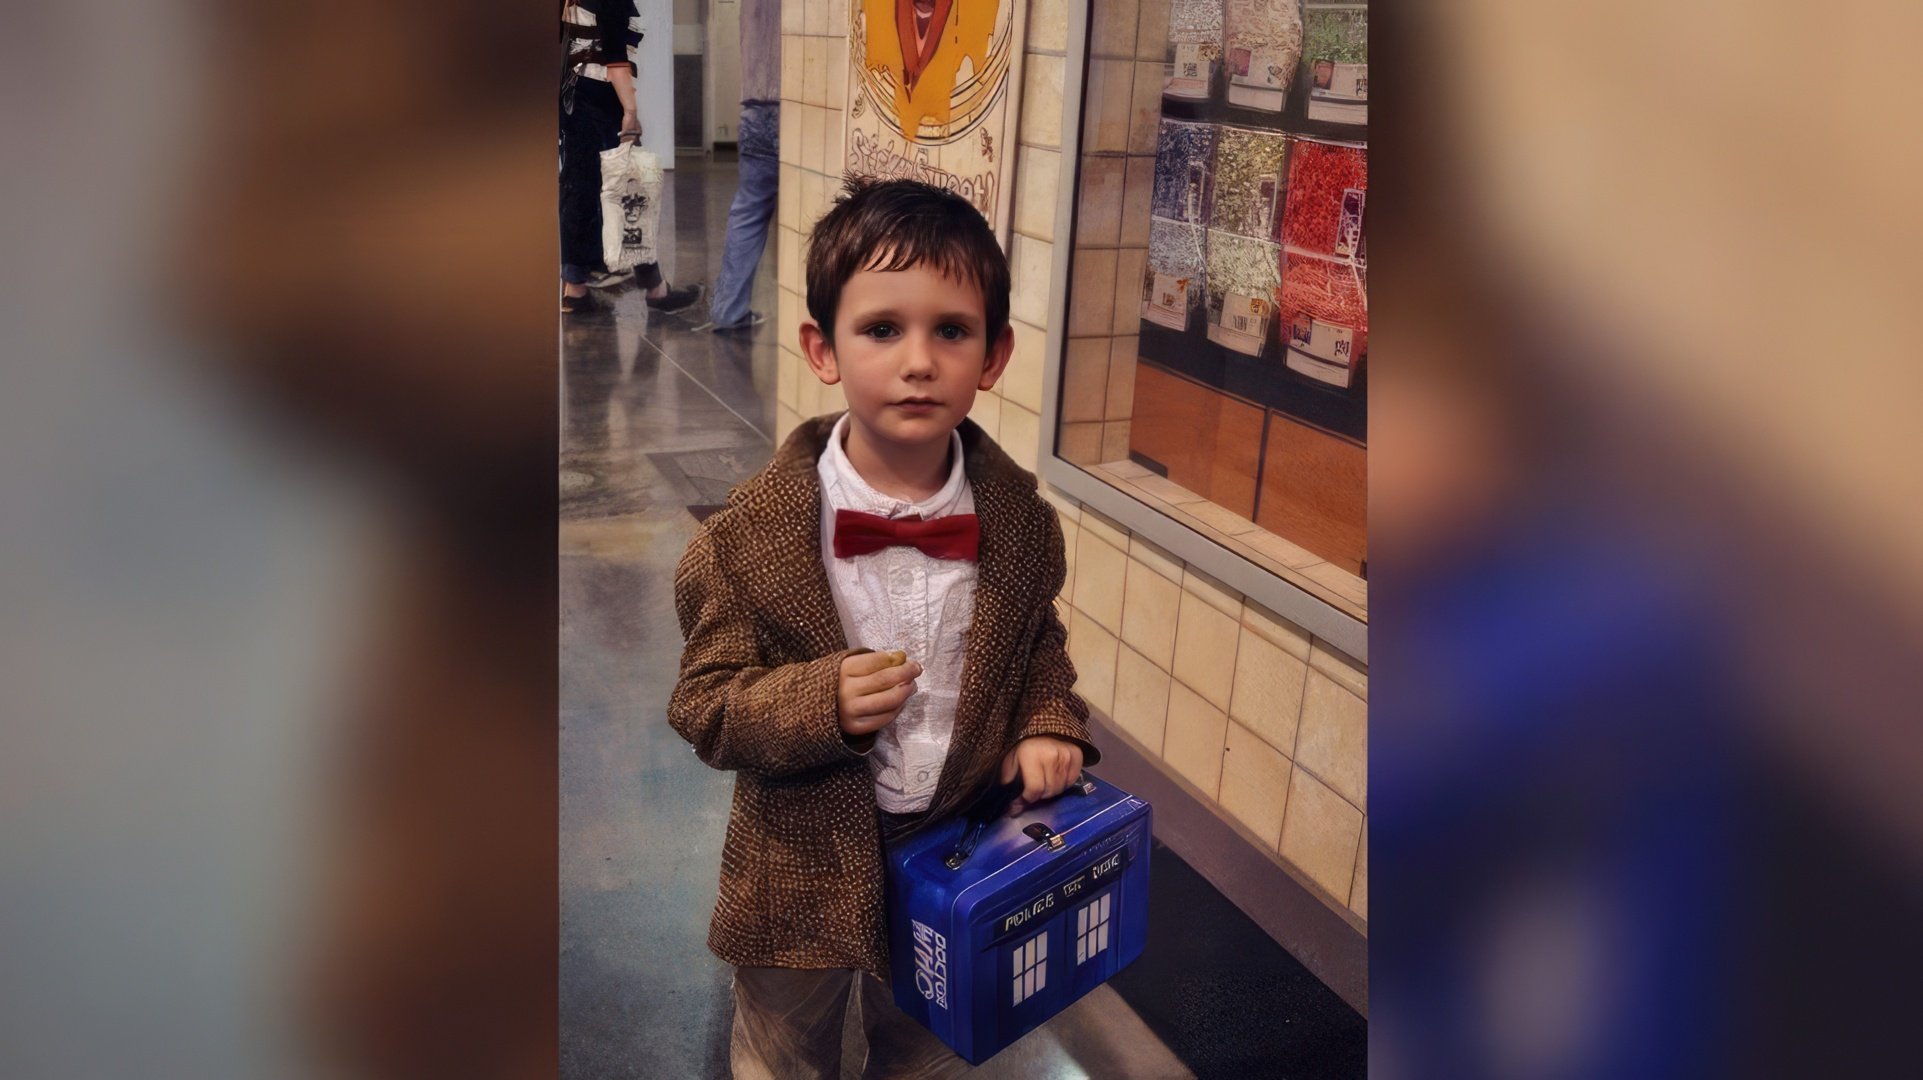 In childhood, David Tennant was obsessed with 'Doctor Who'